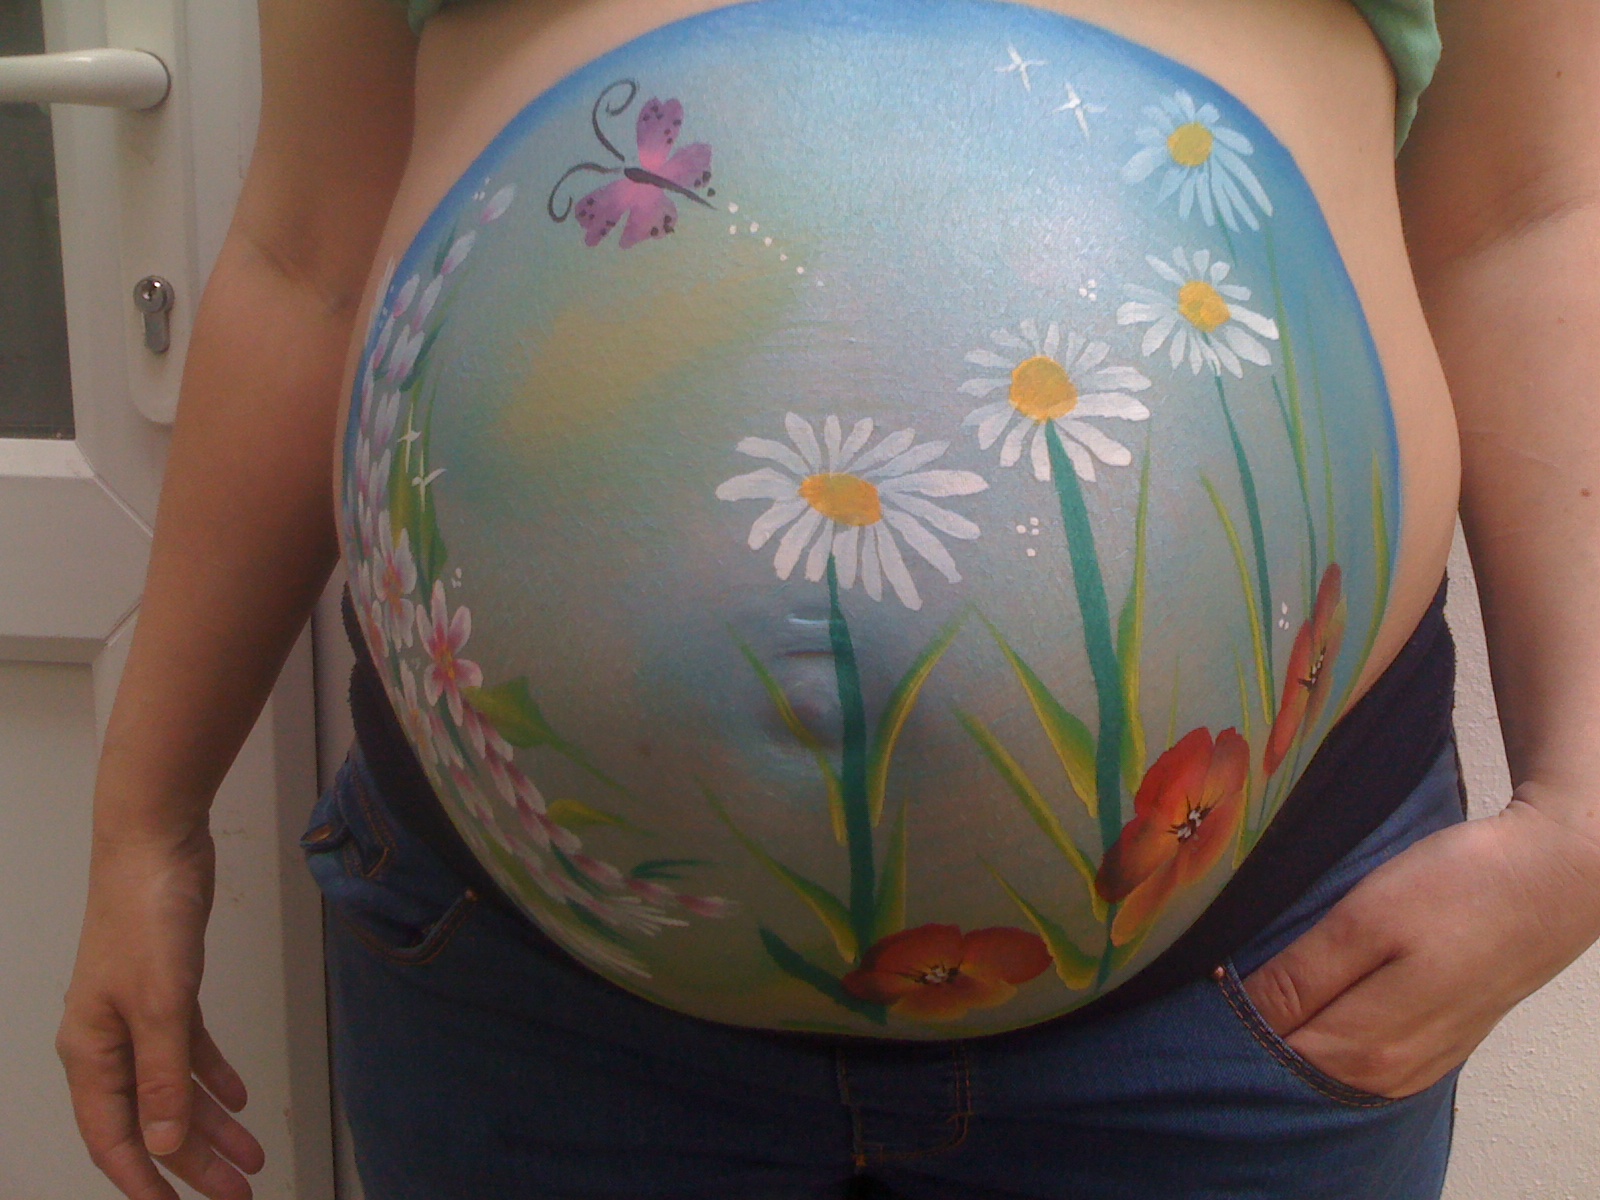 Painted pregnant belly pictures | TubeZZZ Porn Photos